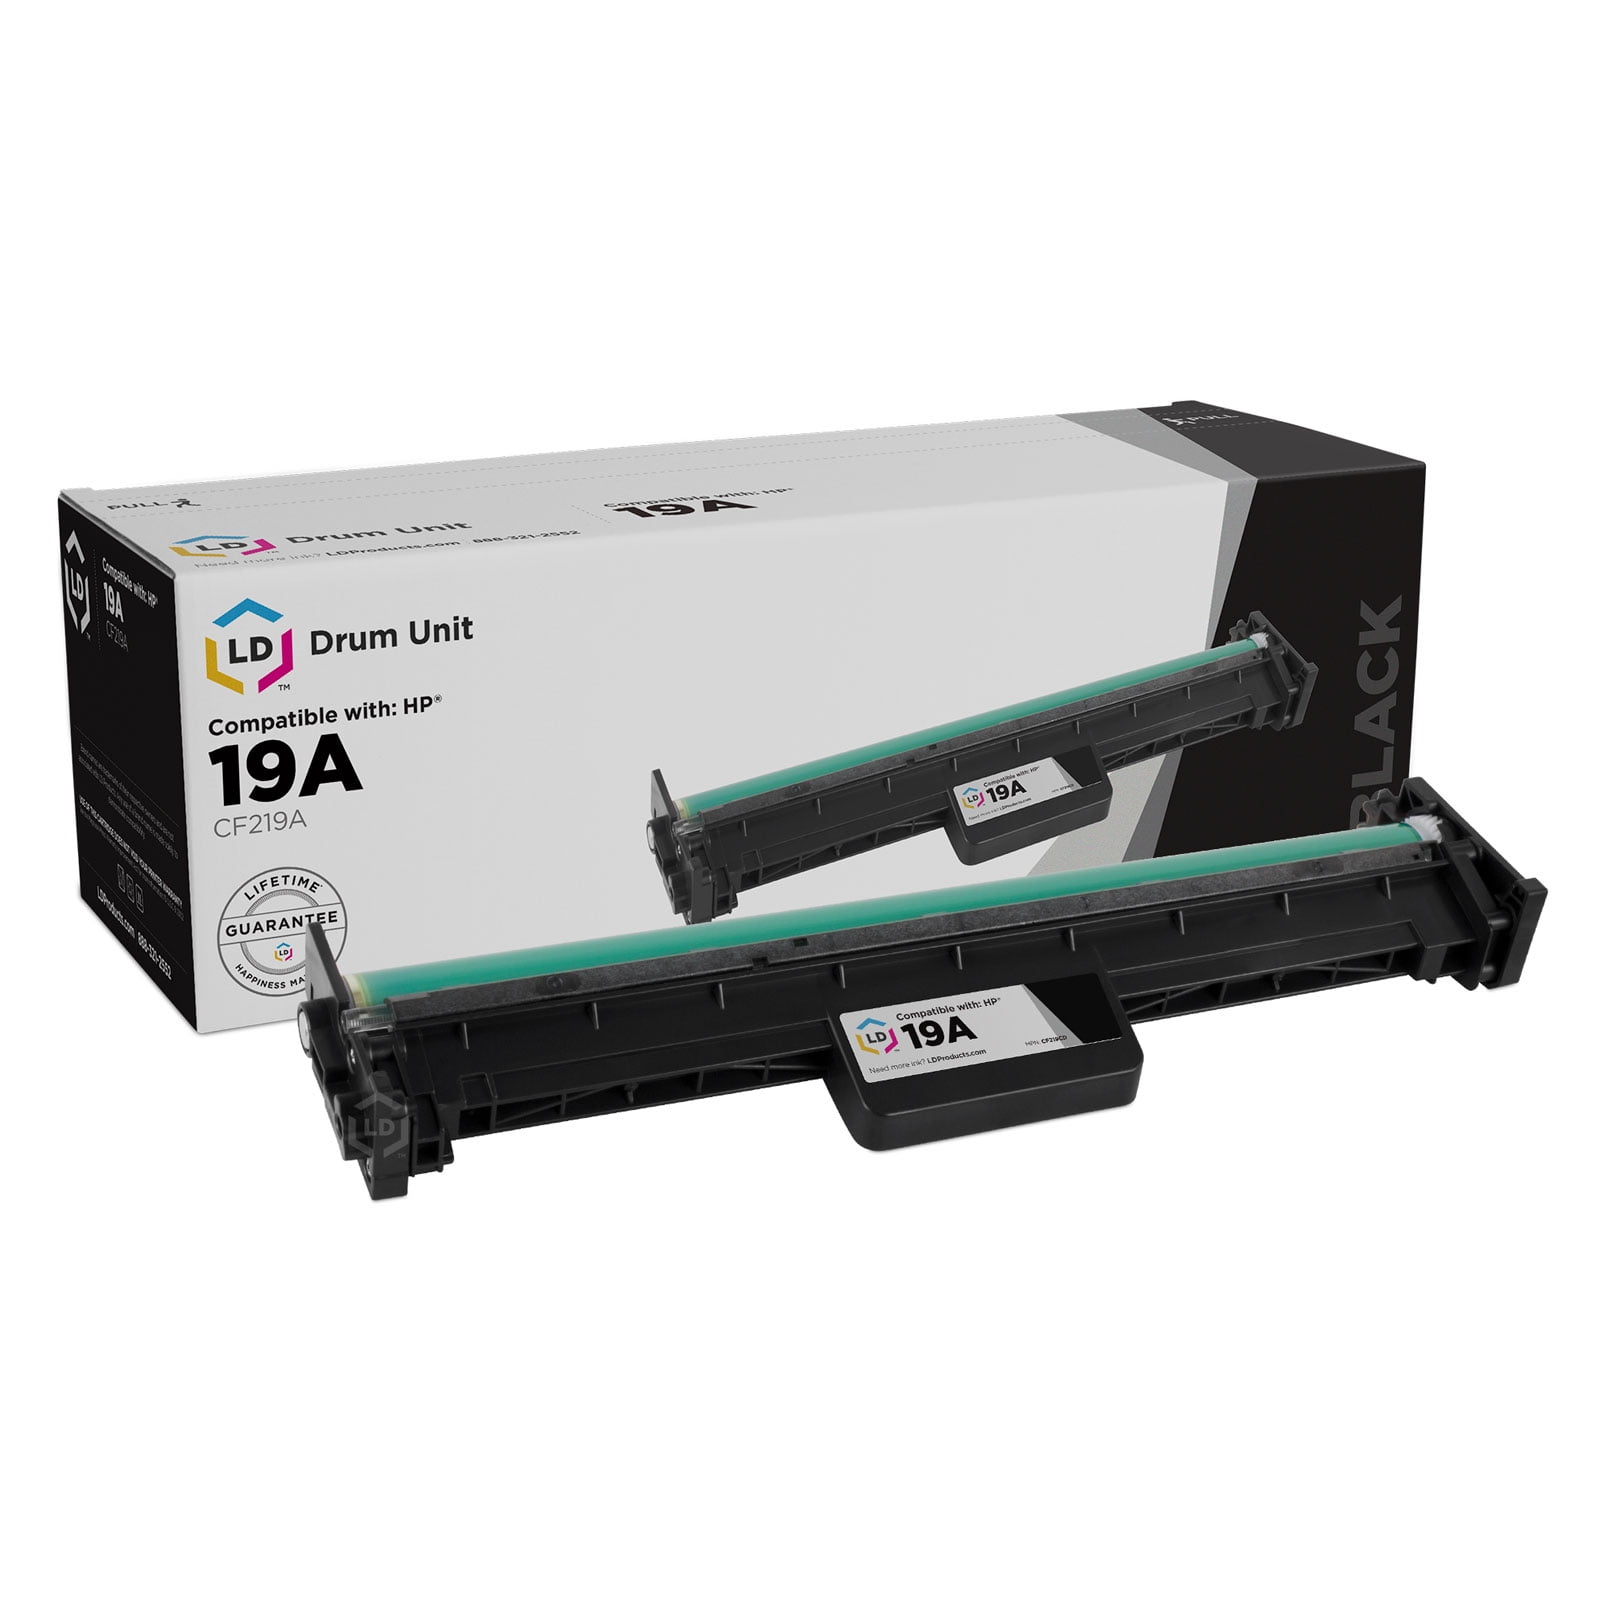 LD Compatible Replacement for HP 19A / CF219A Drum Unit for LaserJet M102w, MFP M130a, M130fn, MFP M130fw, M130nw - Walmart.com